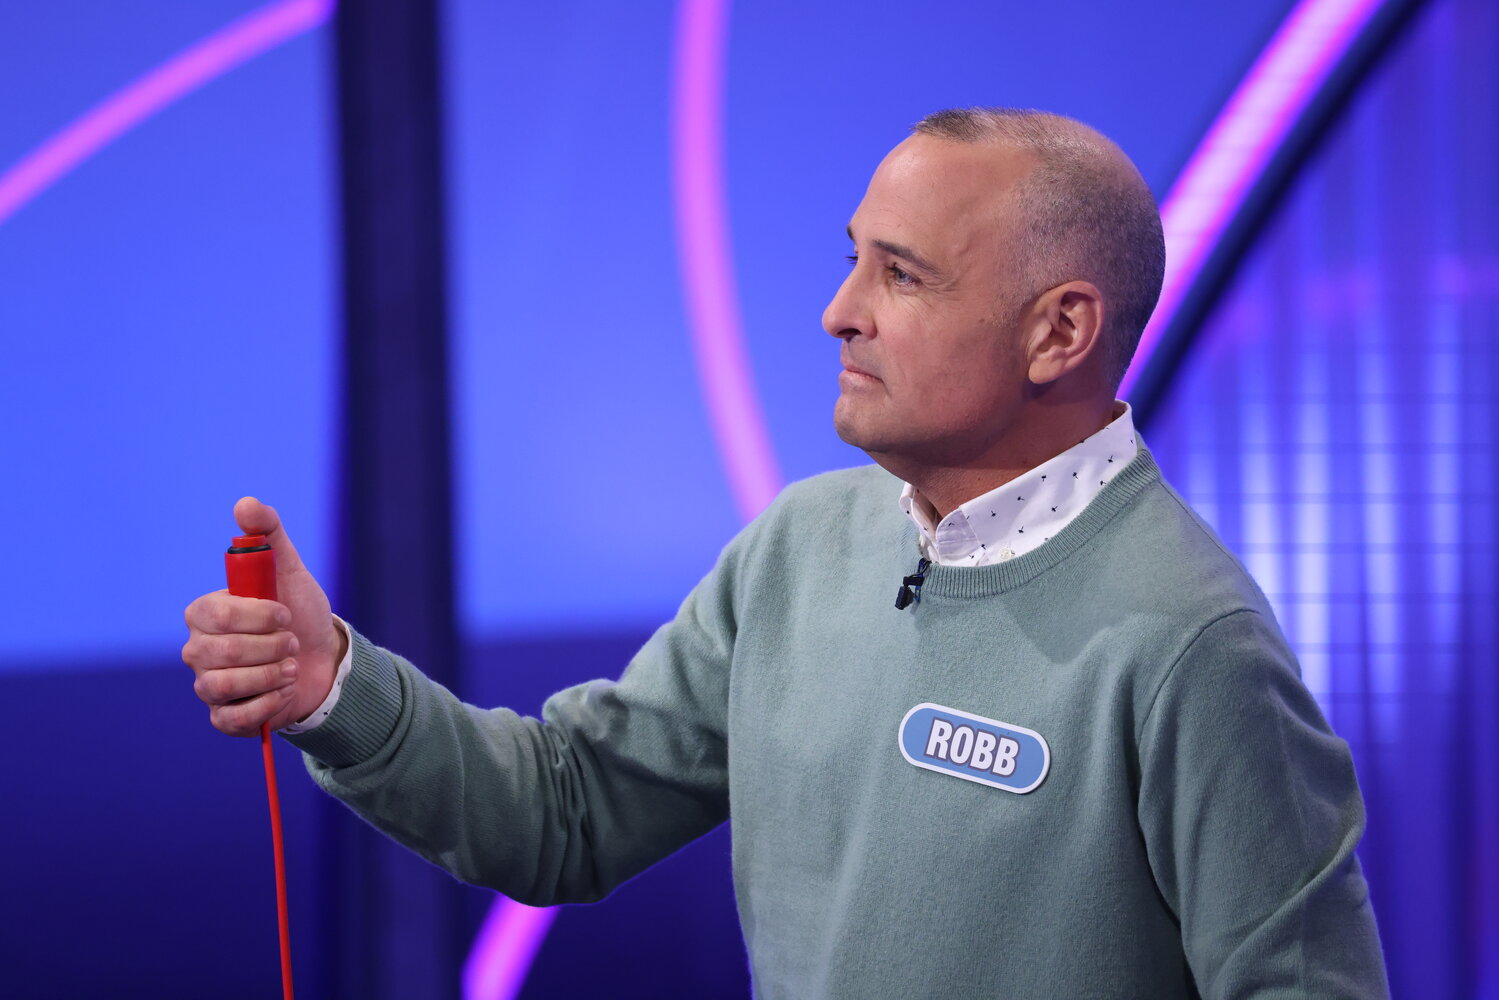 Islip First-grade teacher Robert Le Vien crossed off an item on his bucket list when appearing on "Wheel of Fortune"